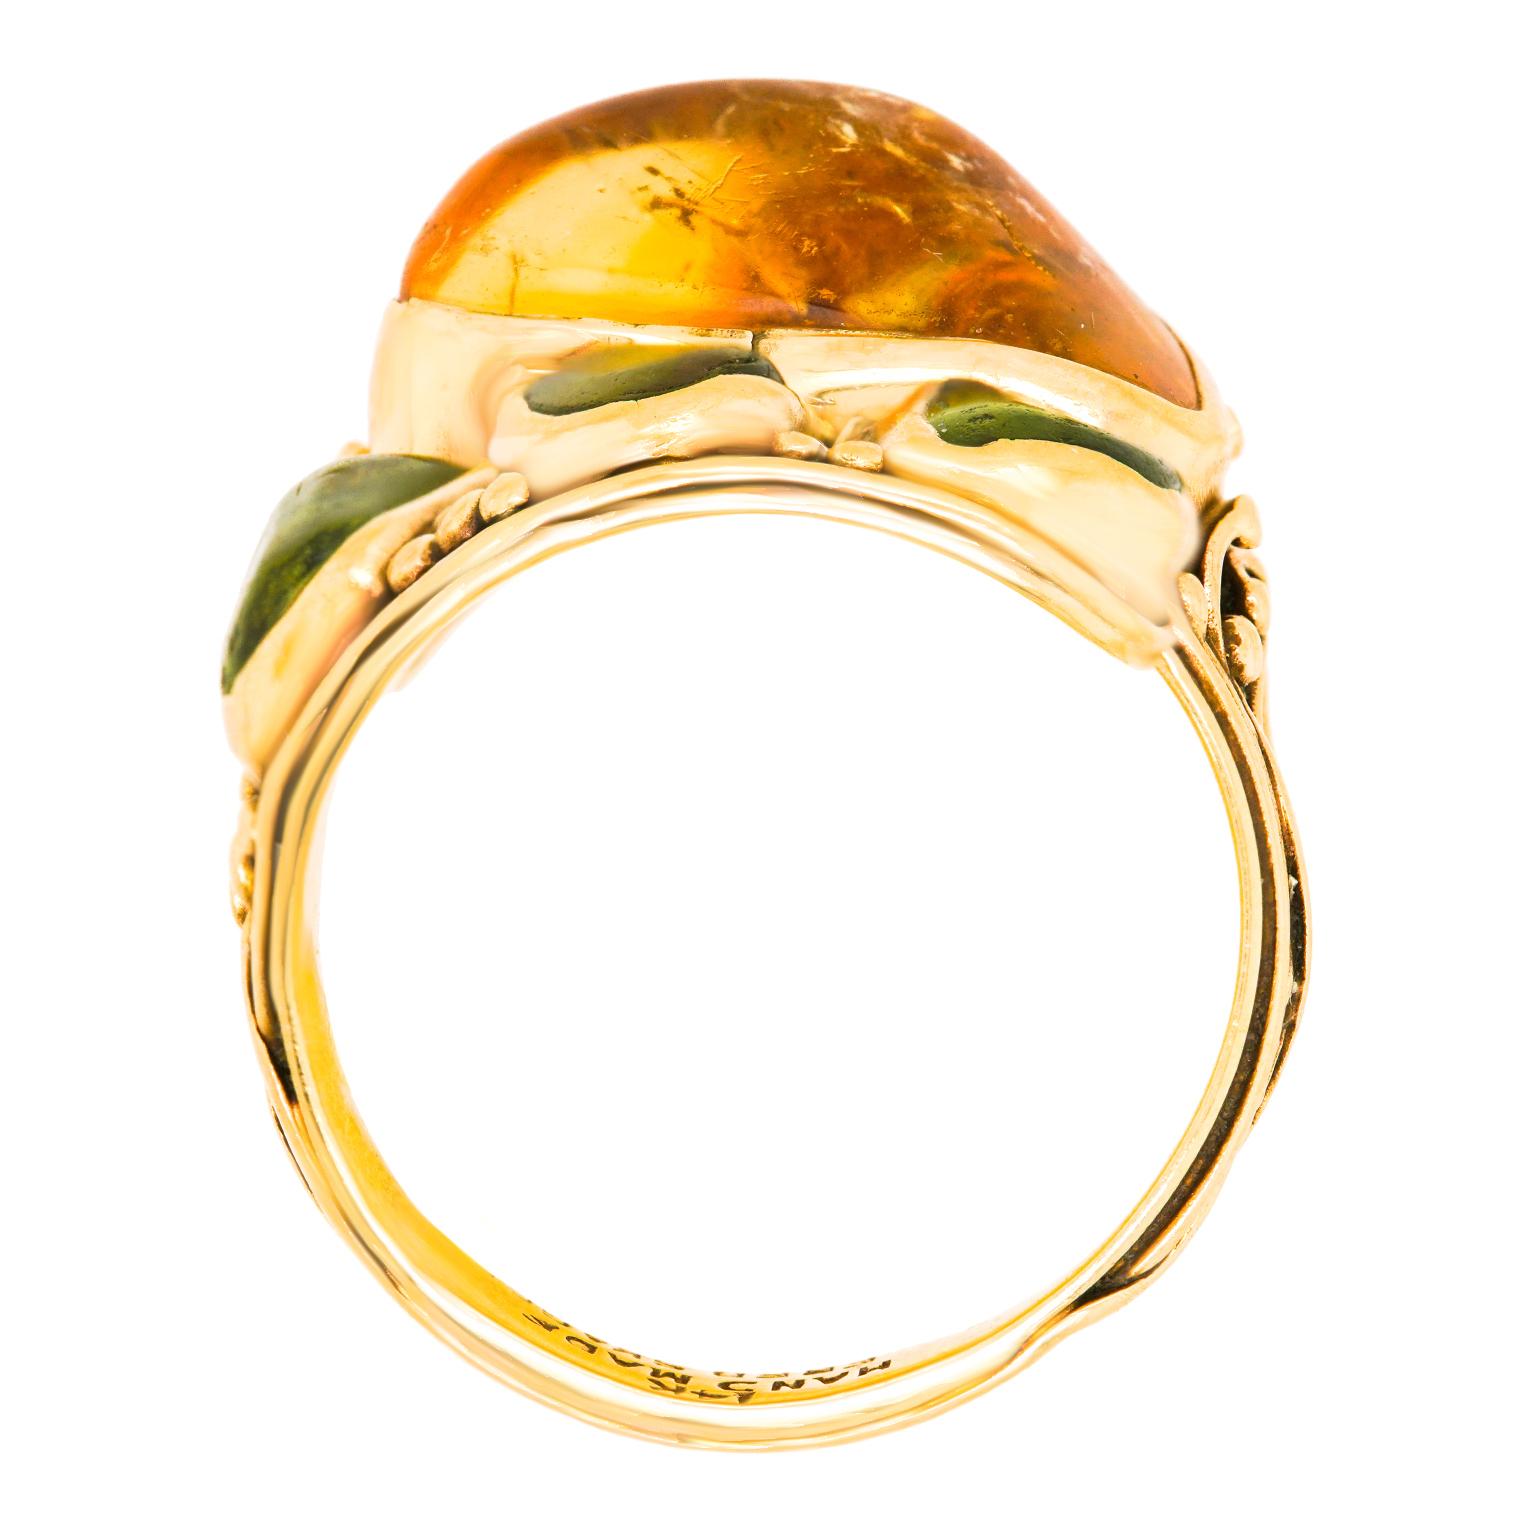 Fred Skaggs Gold Citrine and Peridot Hippie Ring 2